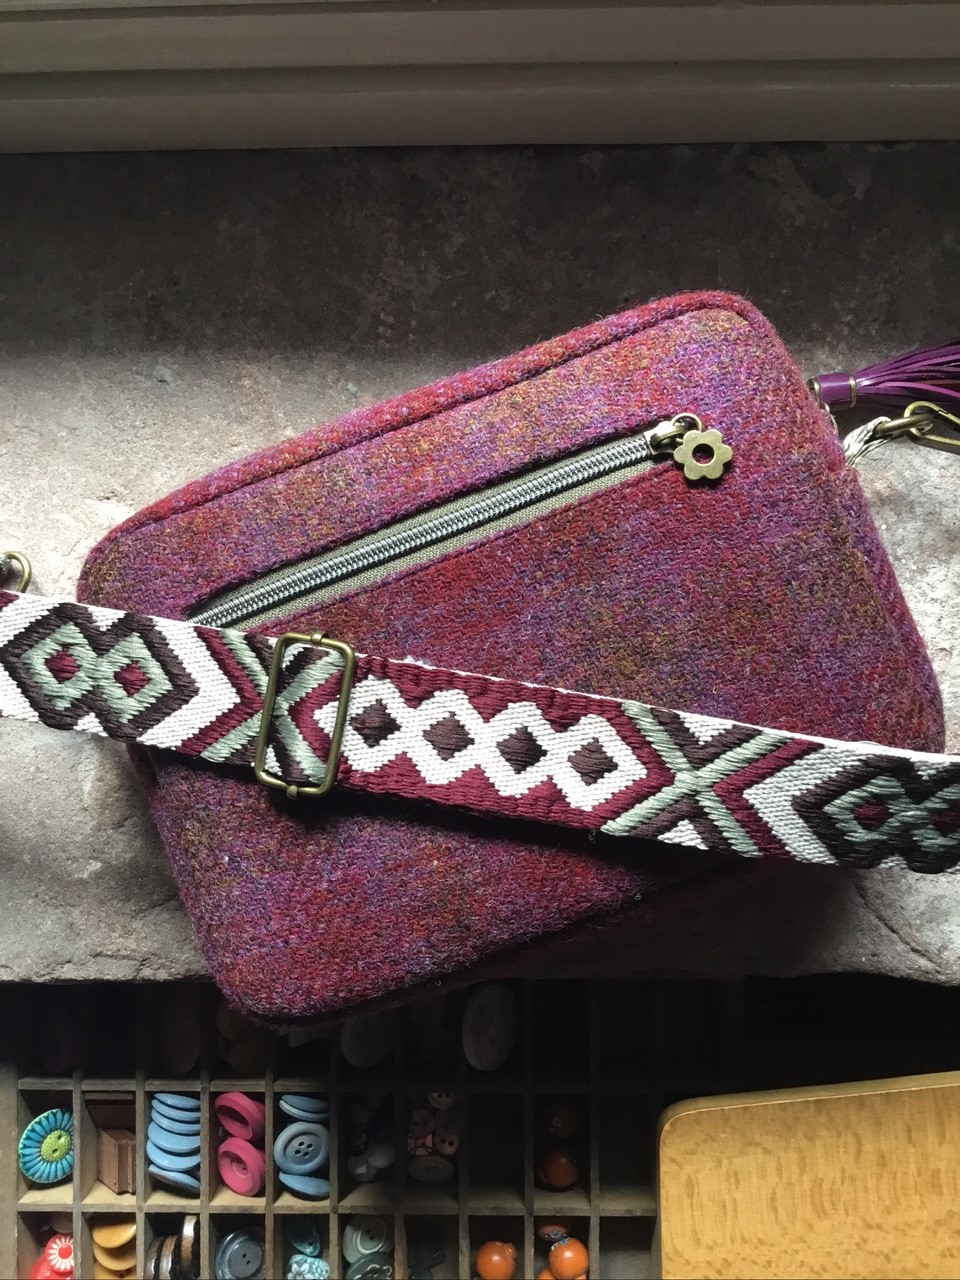 'The Wendy Crossbody Bag' - Two day Bag Making Workshops with Emma of 'Hole House Bags'